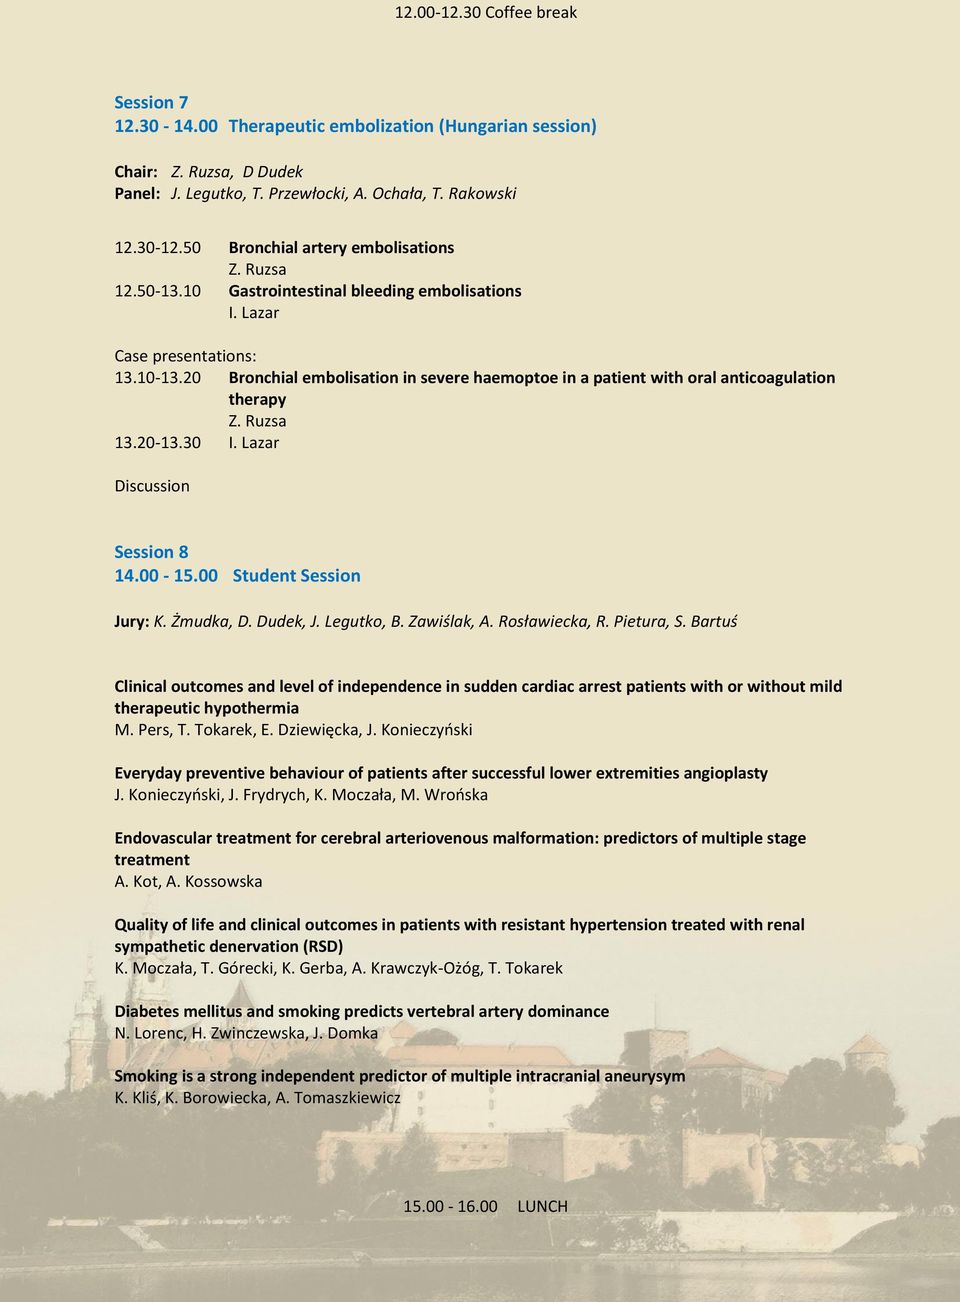 20 Bronchial embolisation in severe haemoptoe in a patient with oral anticoagulation therapy Z. Ruzsa 13.20-13.30 I. Lazar Discussion Session 8 14.00-15.00 Student Session Jury: K. Żmudka, D.